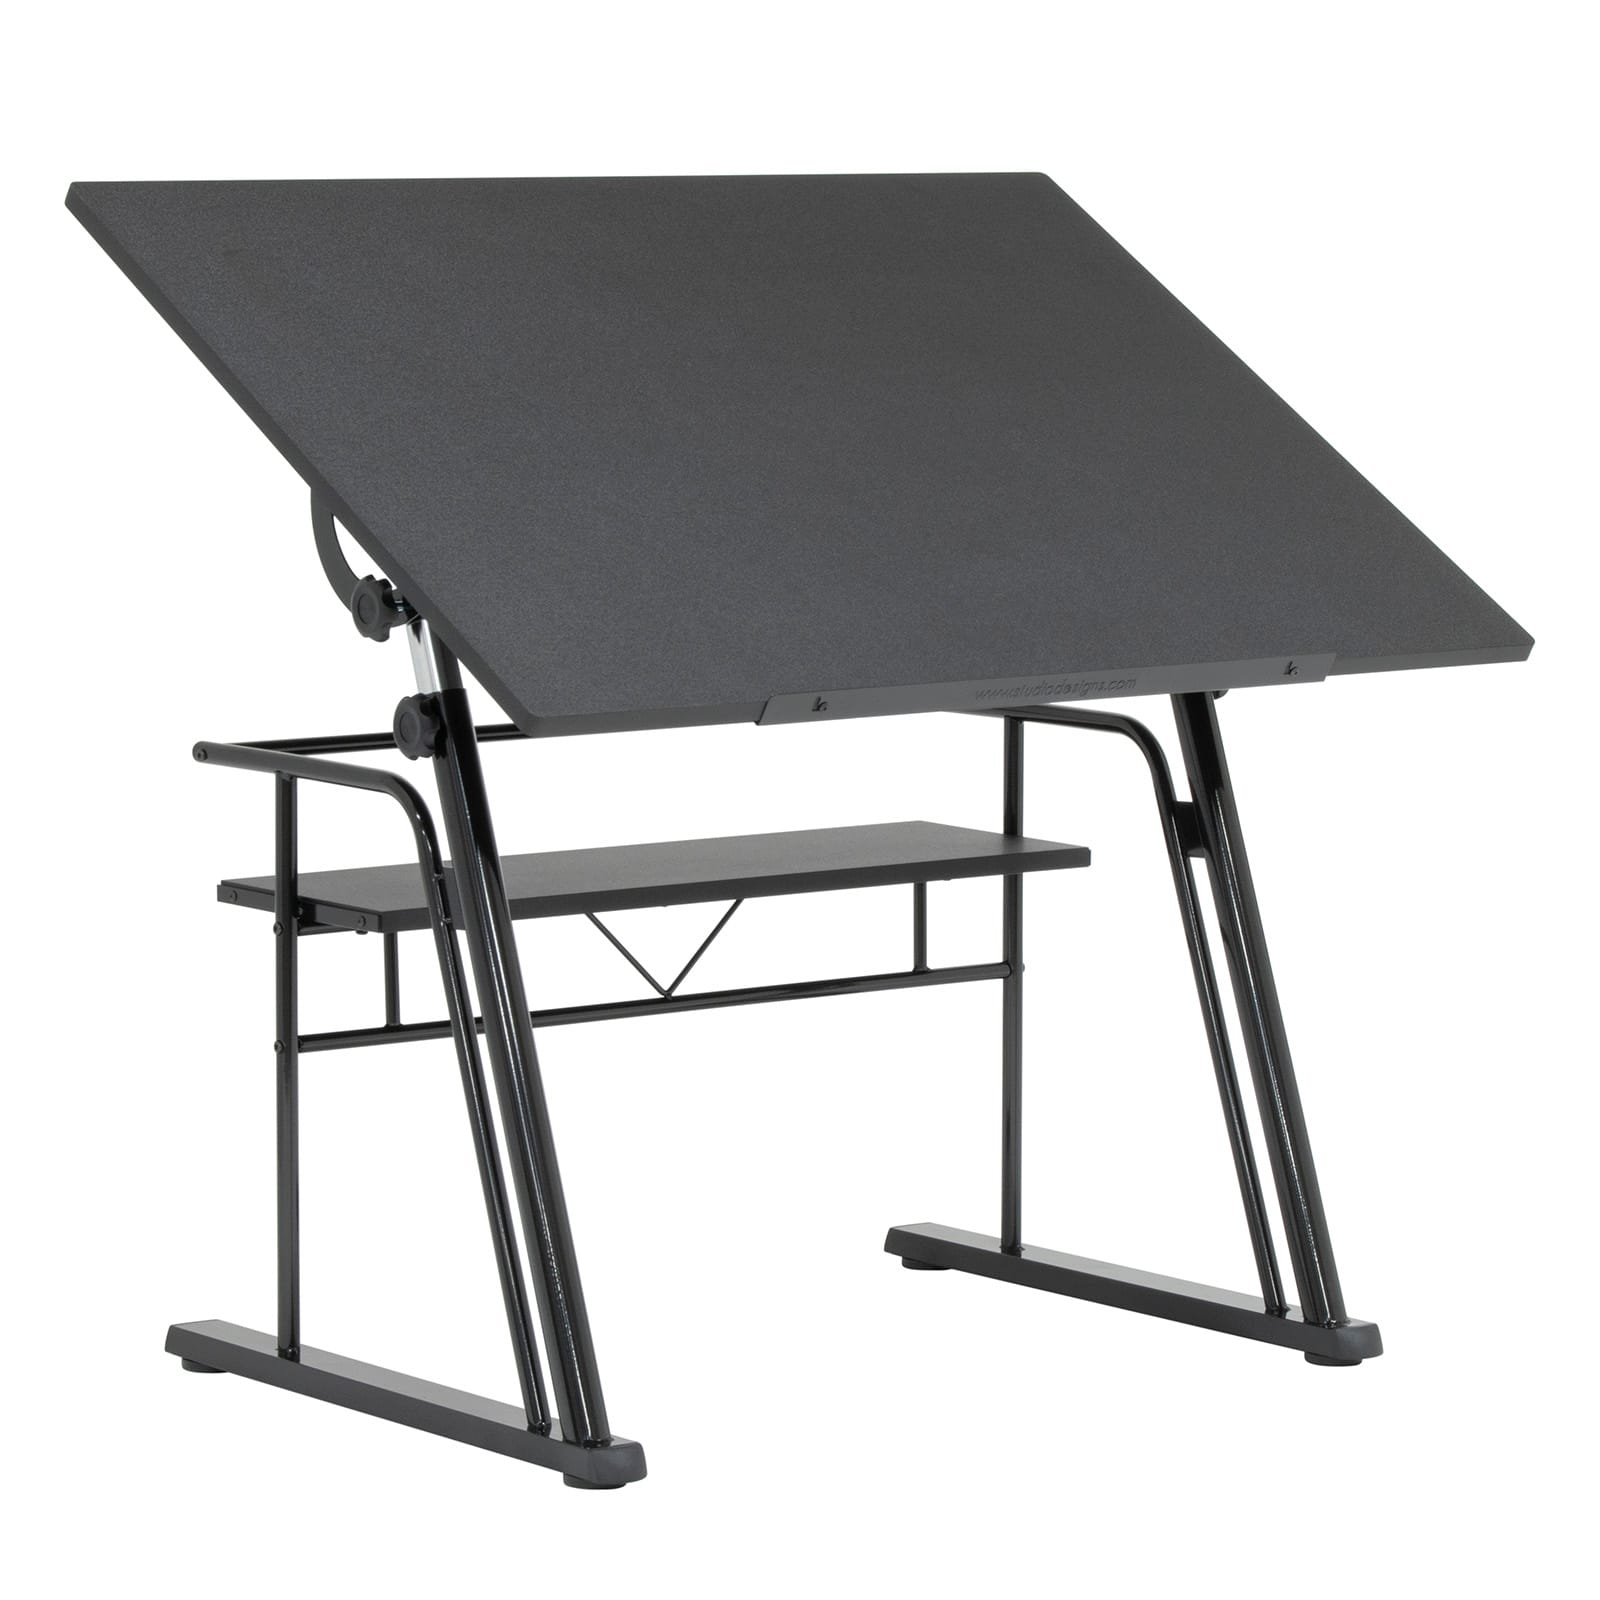 Adjustable Drawing and Drafting Table with Black Frame and Dual